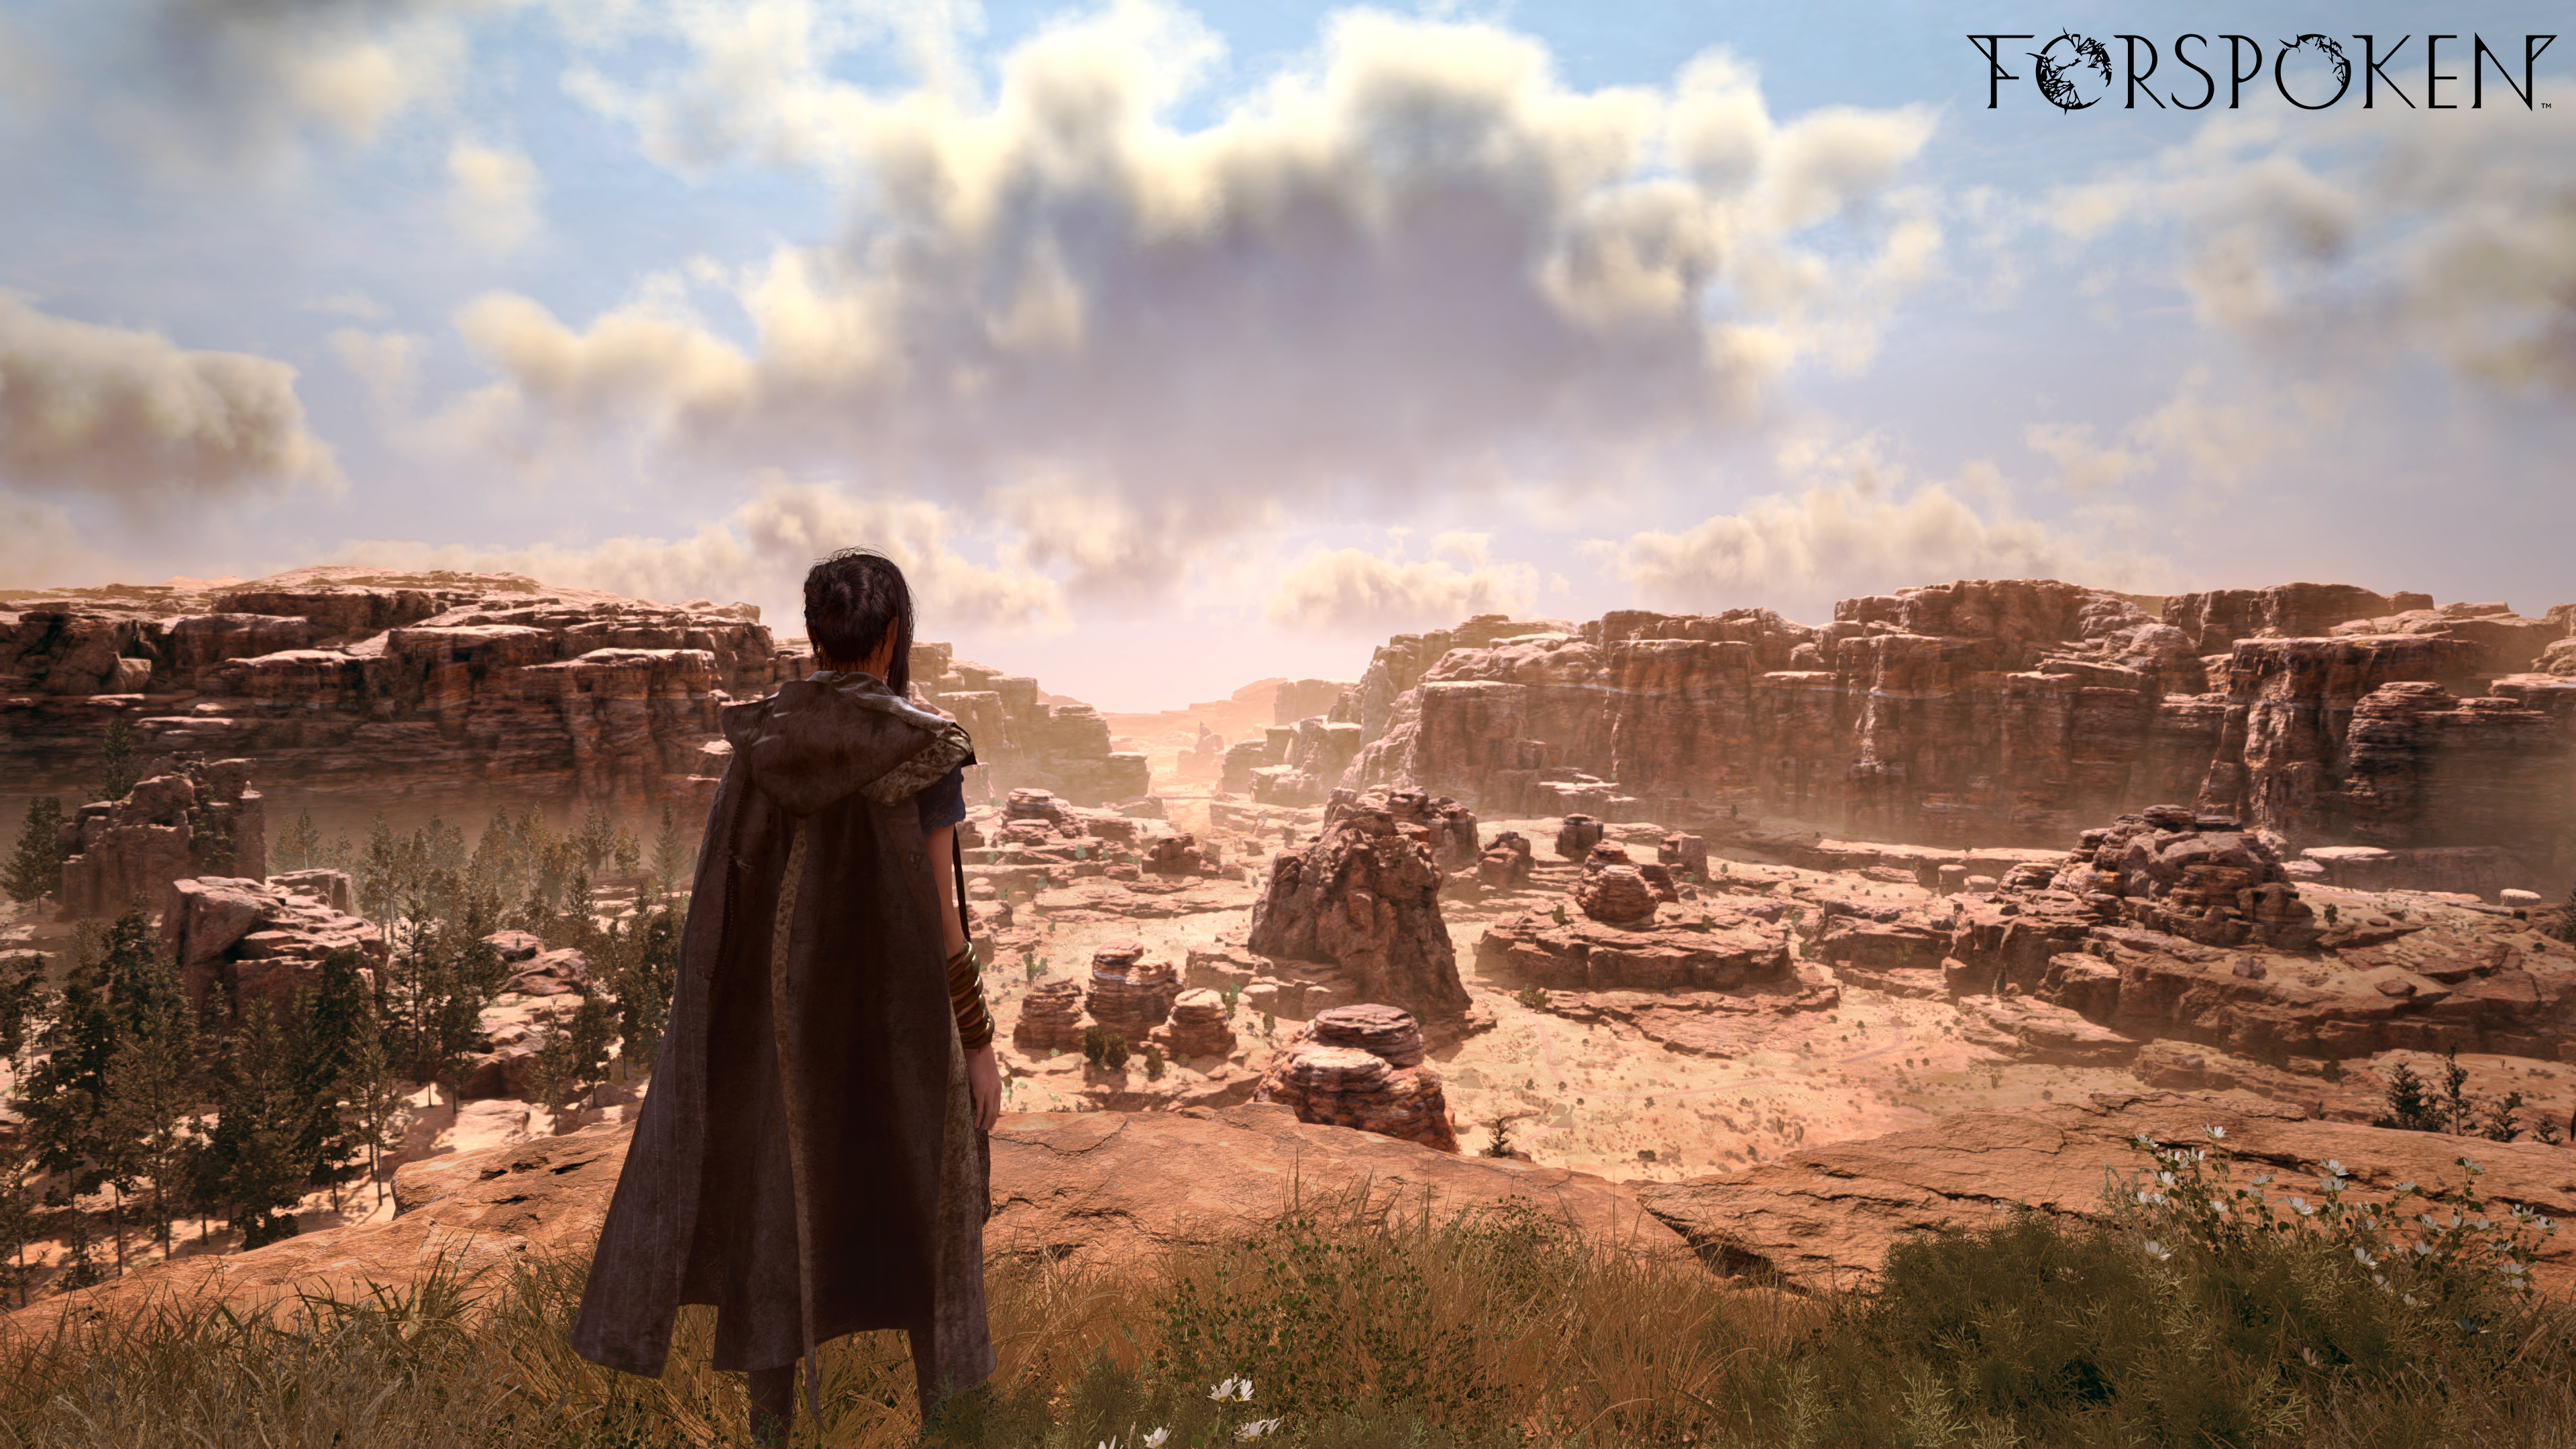 Frey looks out on a desert land in a screenshot from Forspoken (aka Project Athia)